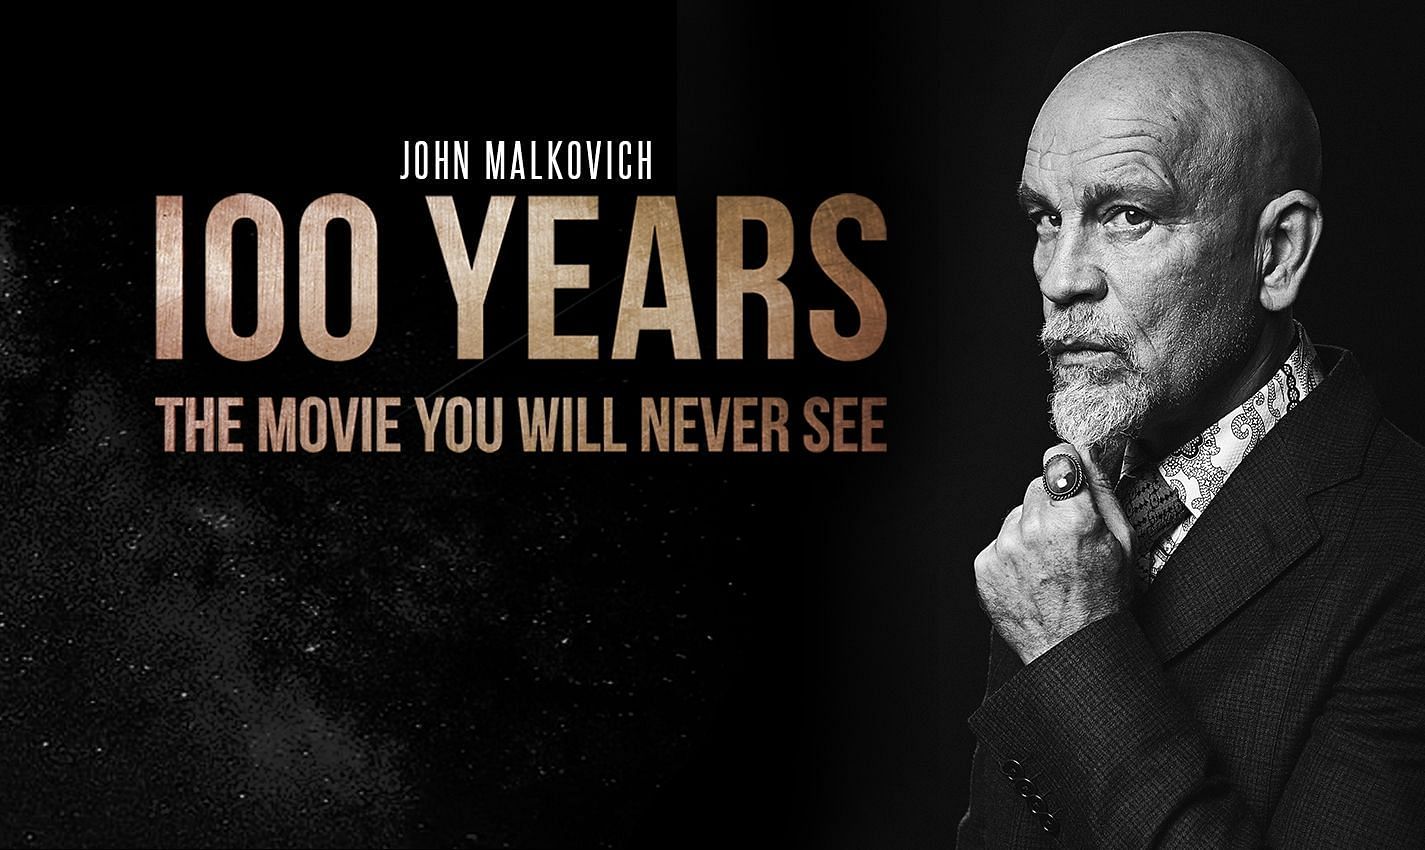 A Cognac Brand Just Made a John Malkovich Film That No One Will